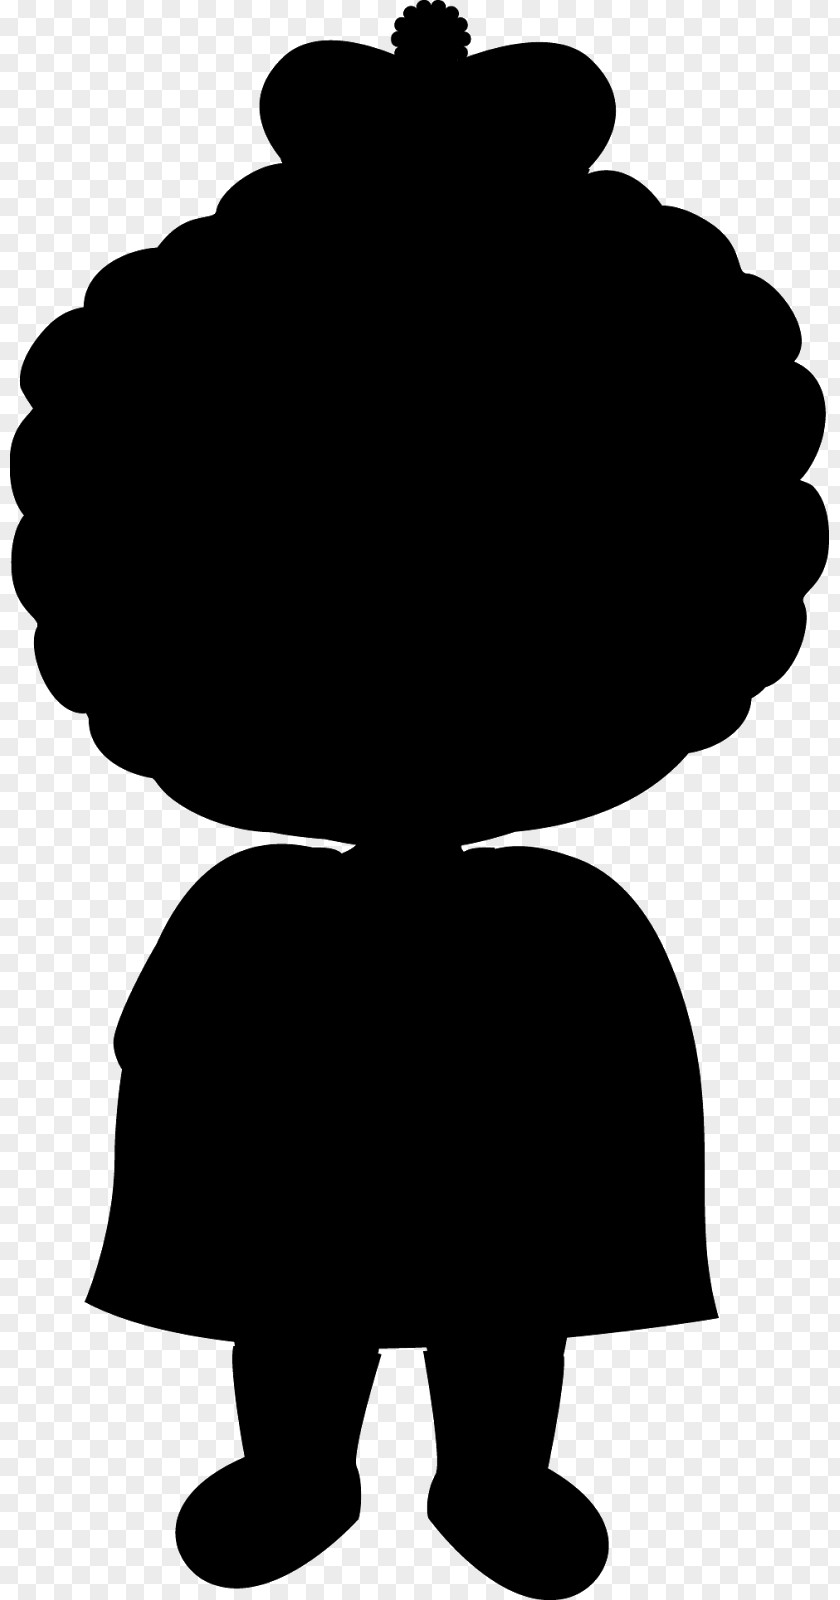 Silhouette Clip Art Image Illustration Photography PNG